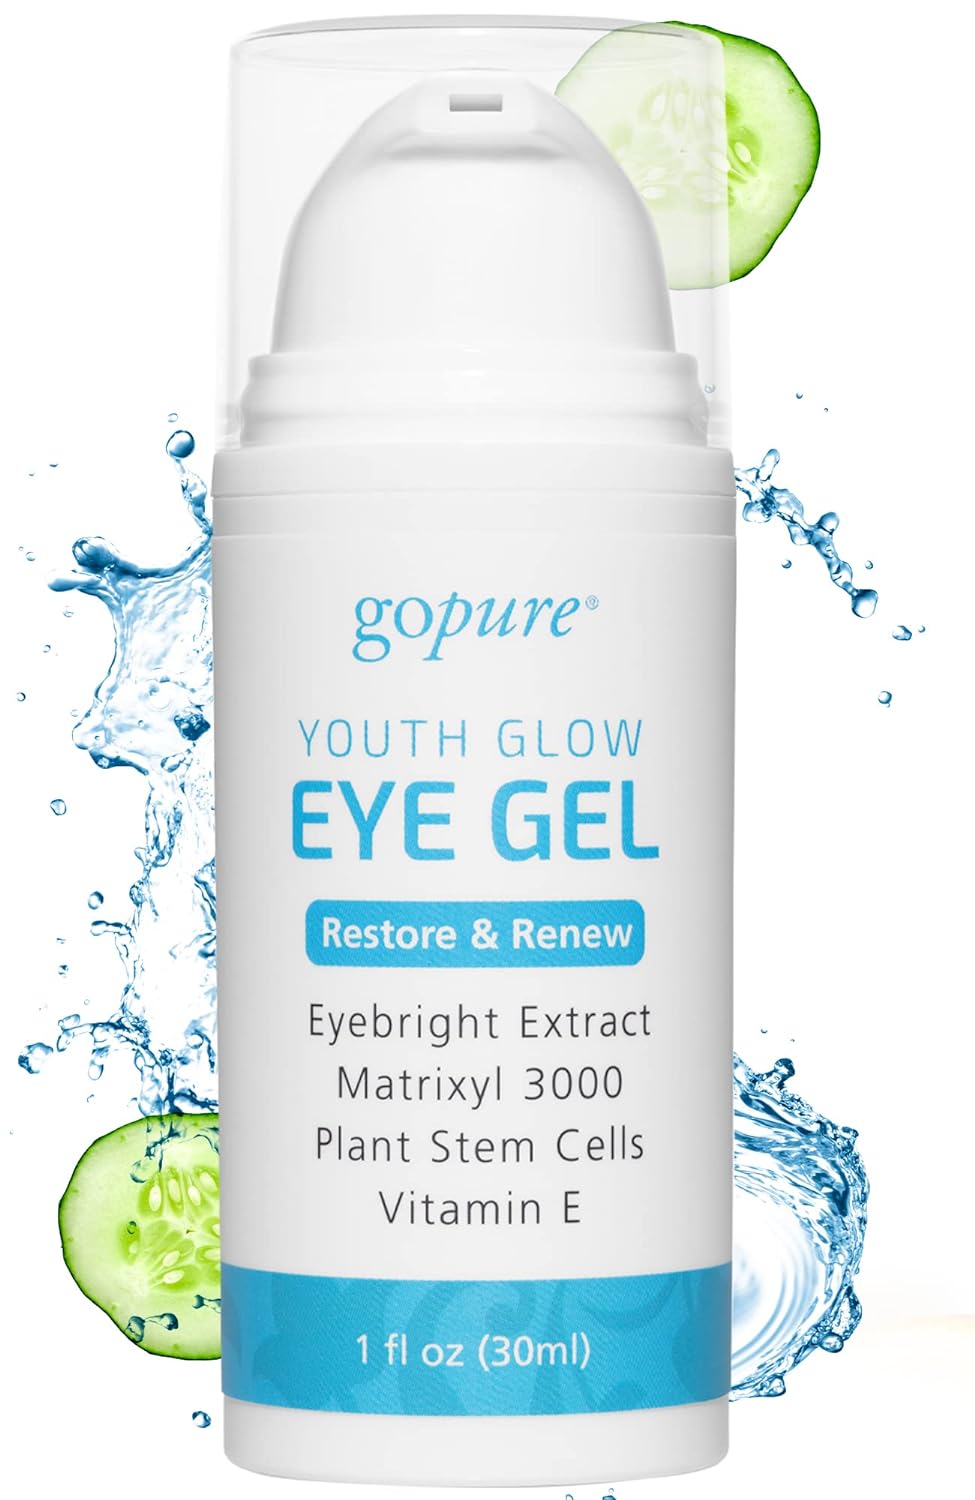 goPure Youth Glow Eye Gel - Anti-Aging Eye Cream that Soothes and Hydrates, Made with Matrixyl 3000 and Hyaluronic Acid for Improve the Look of Puffiness, Dark Circles, and Under Eye Bags - 1